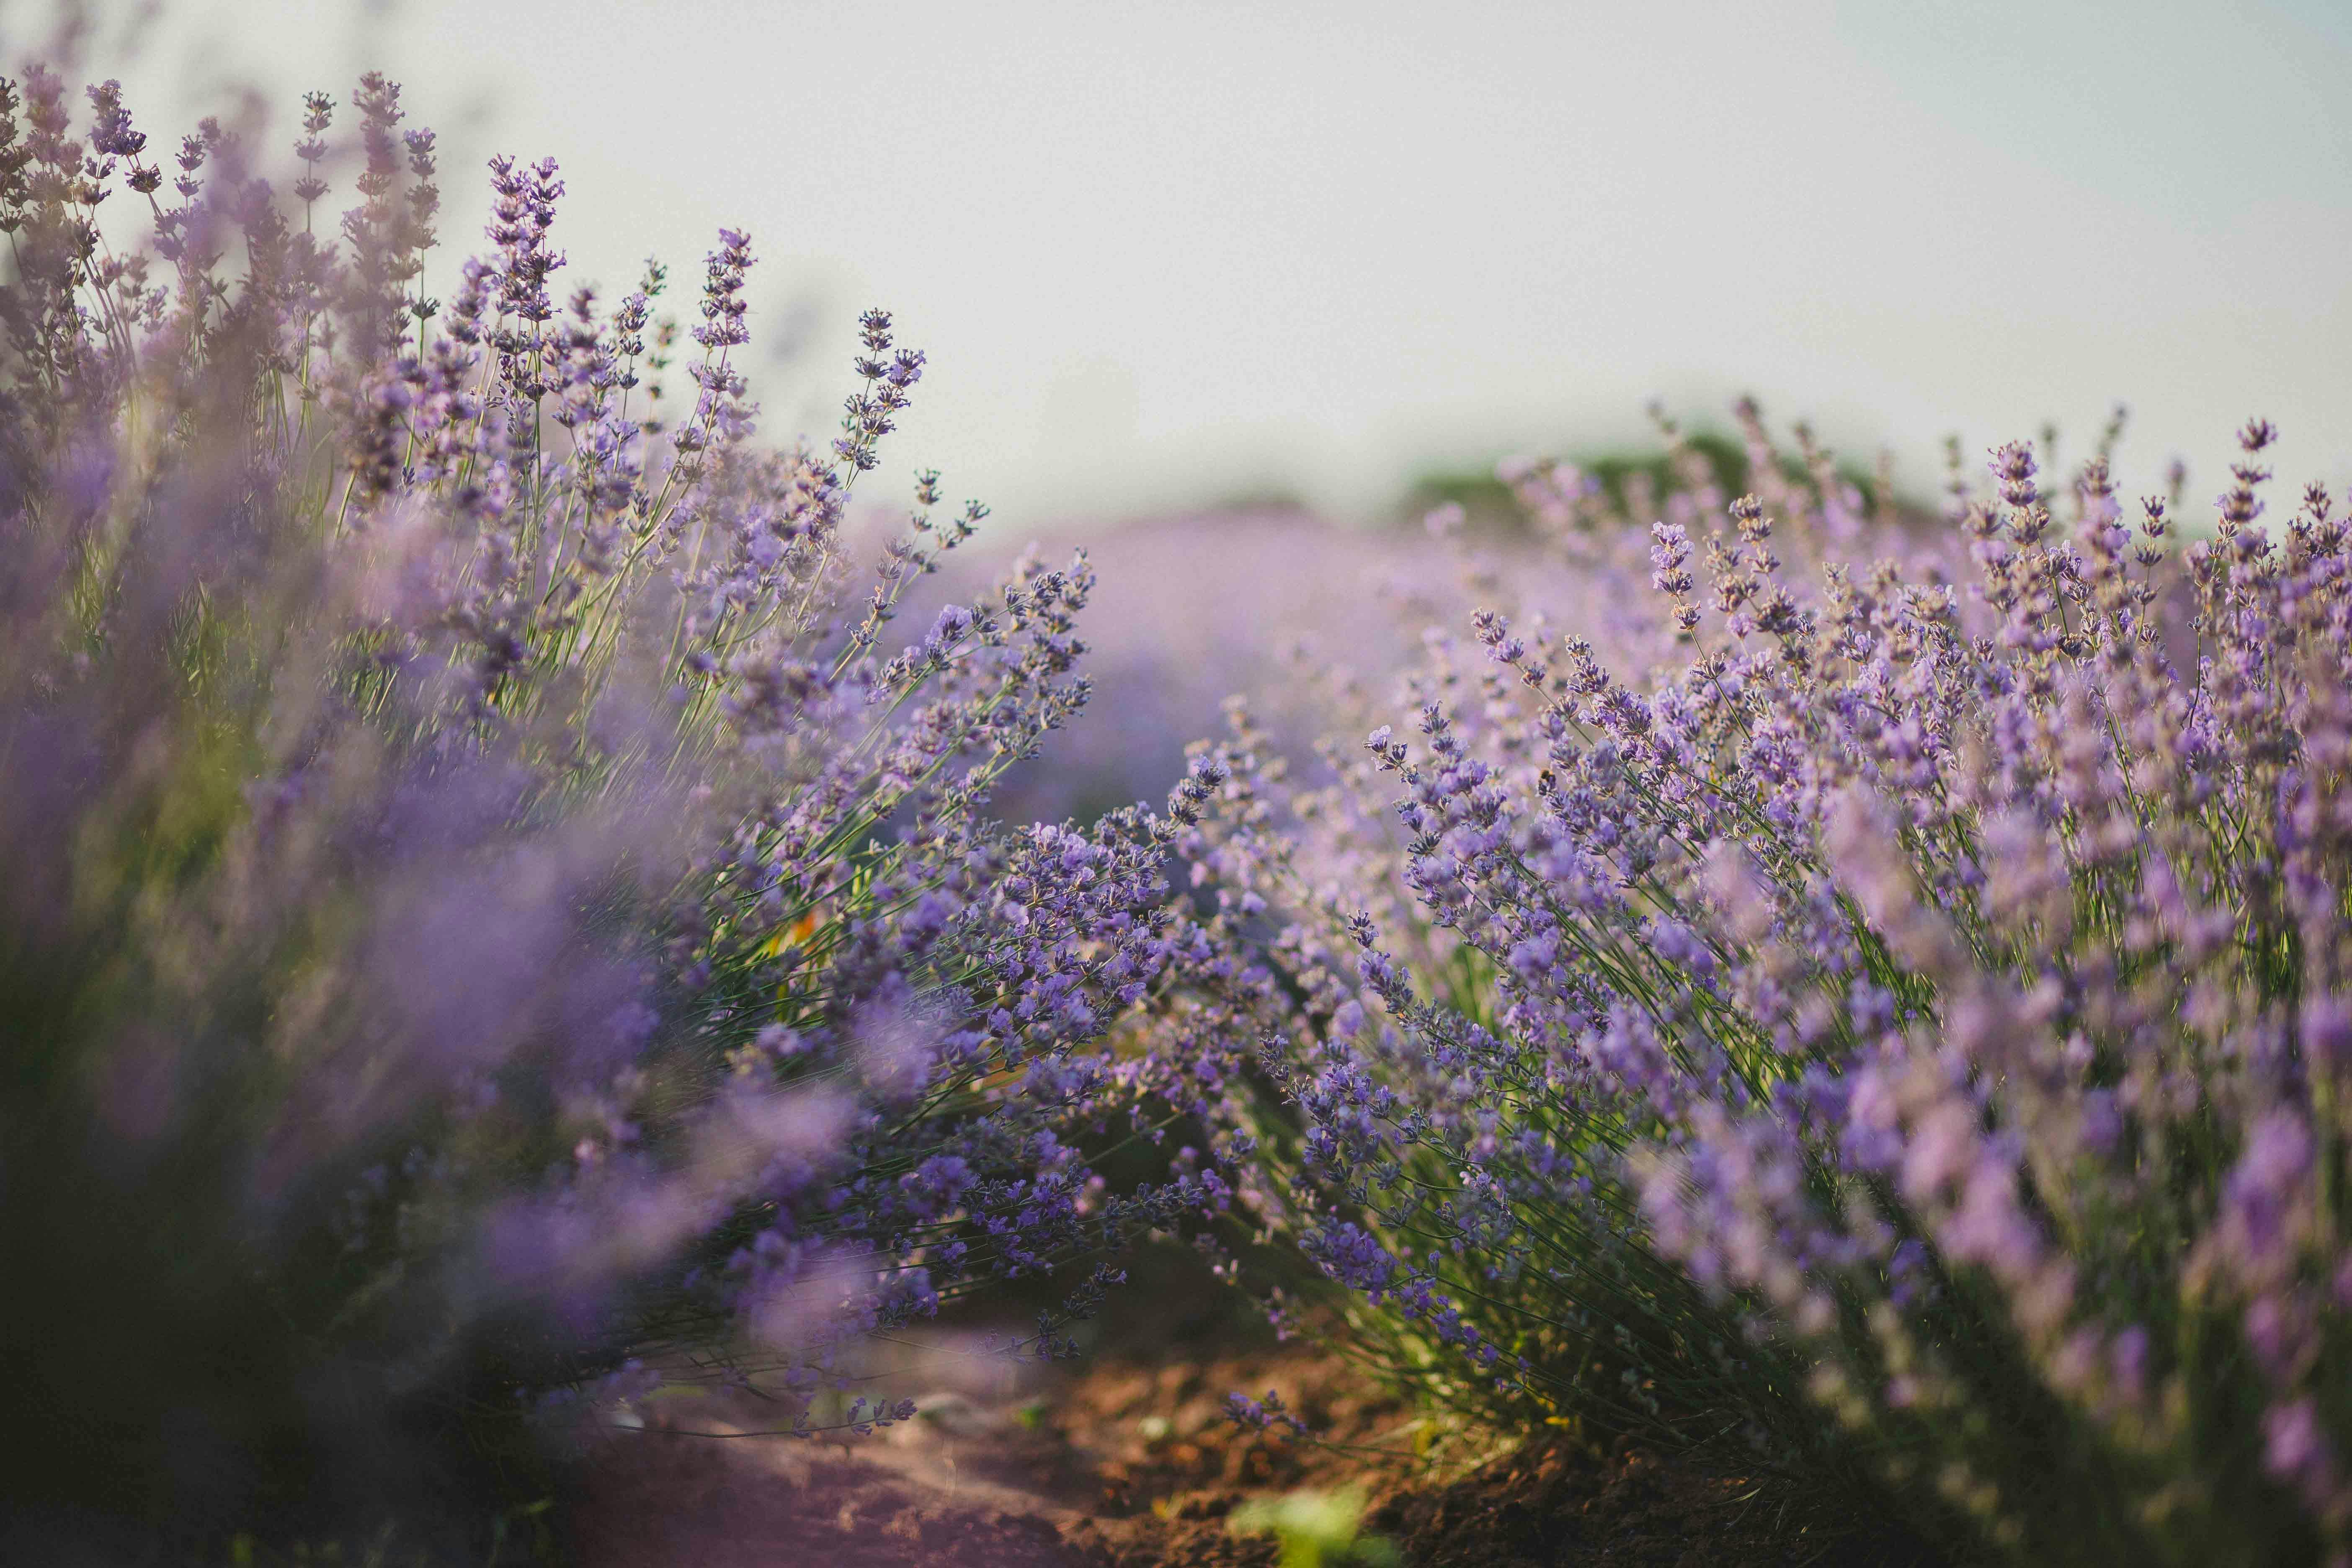 Lavender Background Images  Free Photos PNG Stickers Wallpapers   Backgrounds  rawpixel